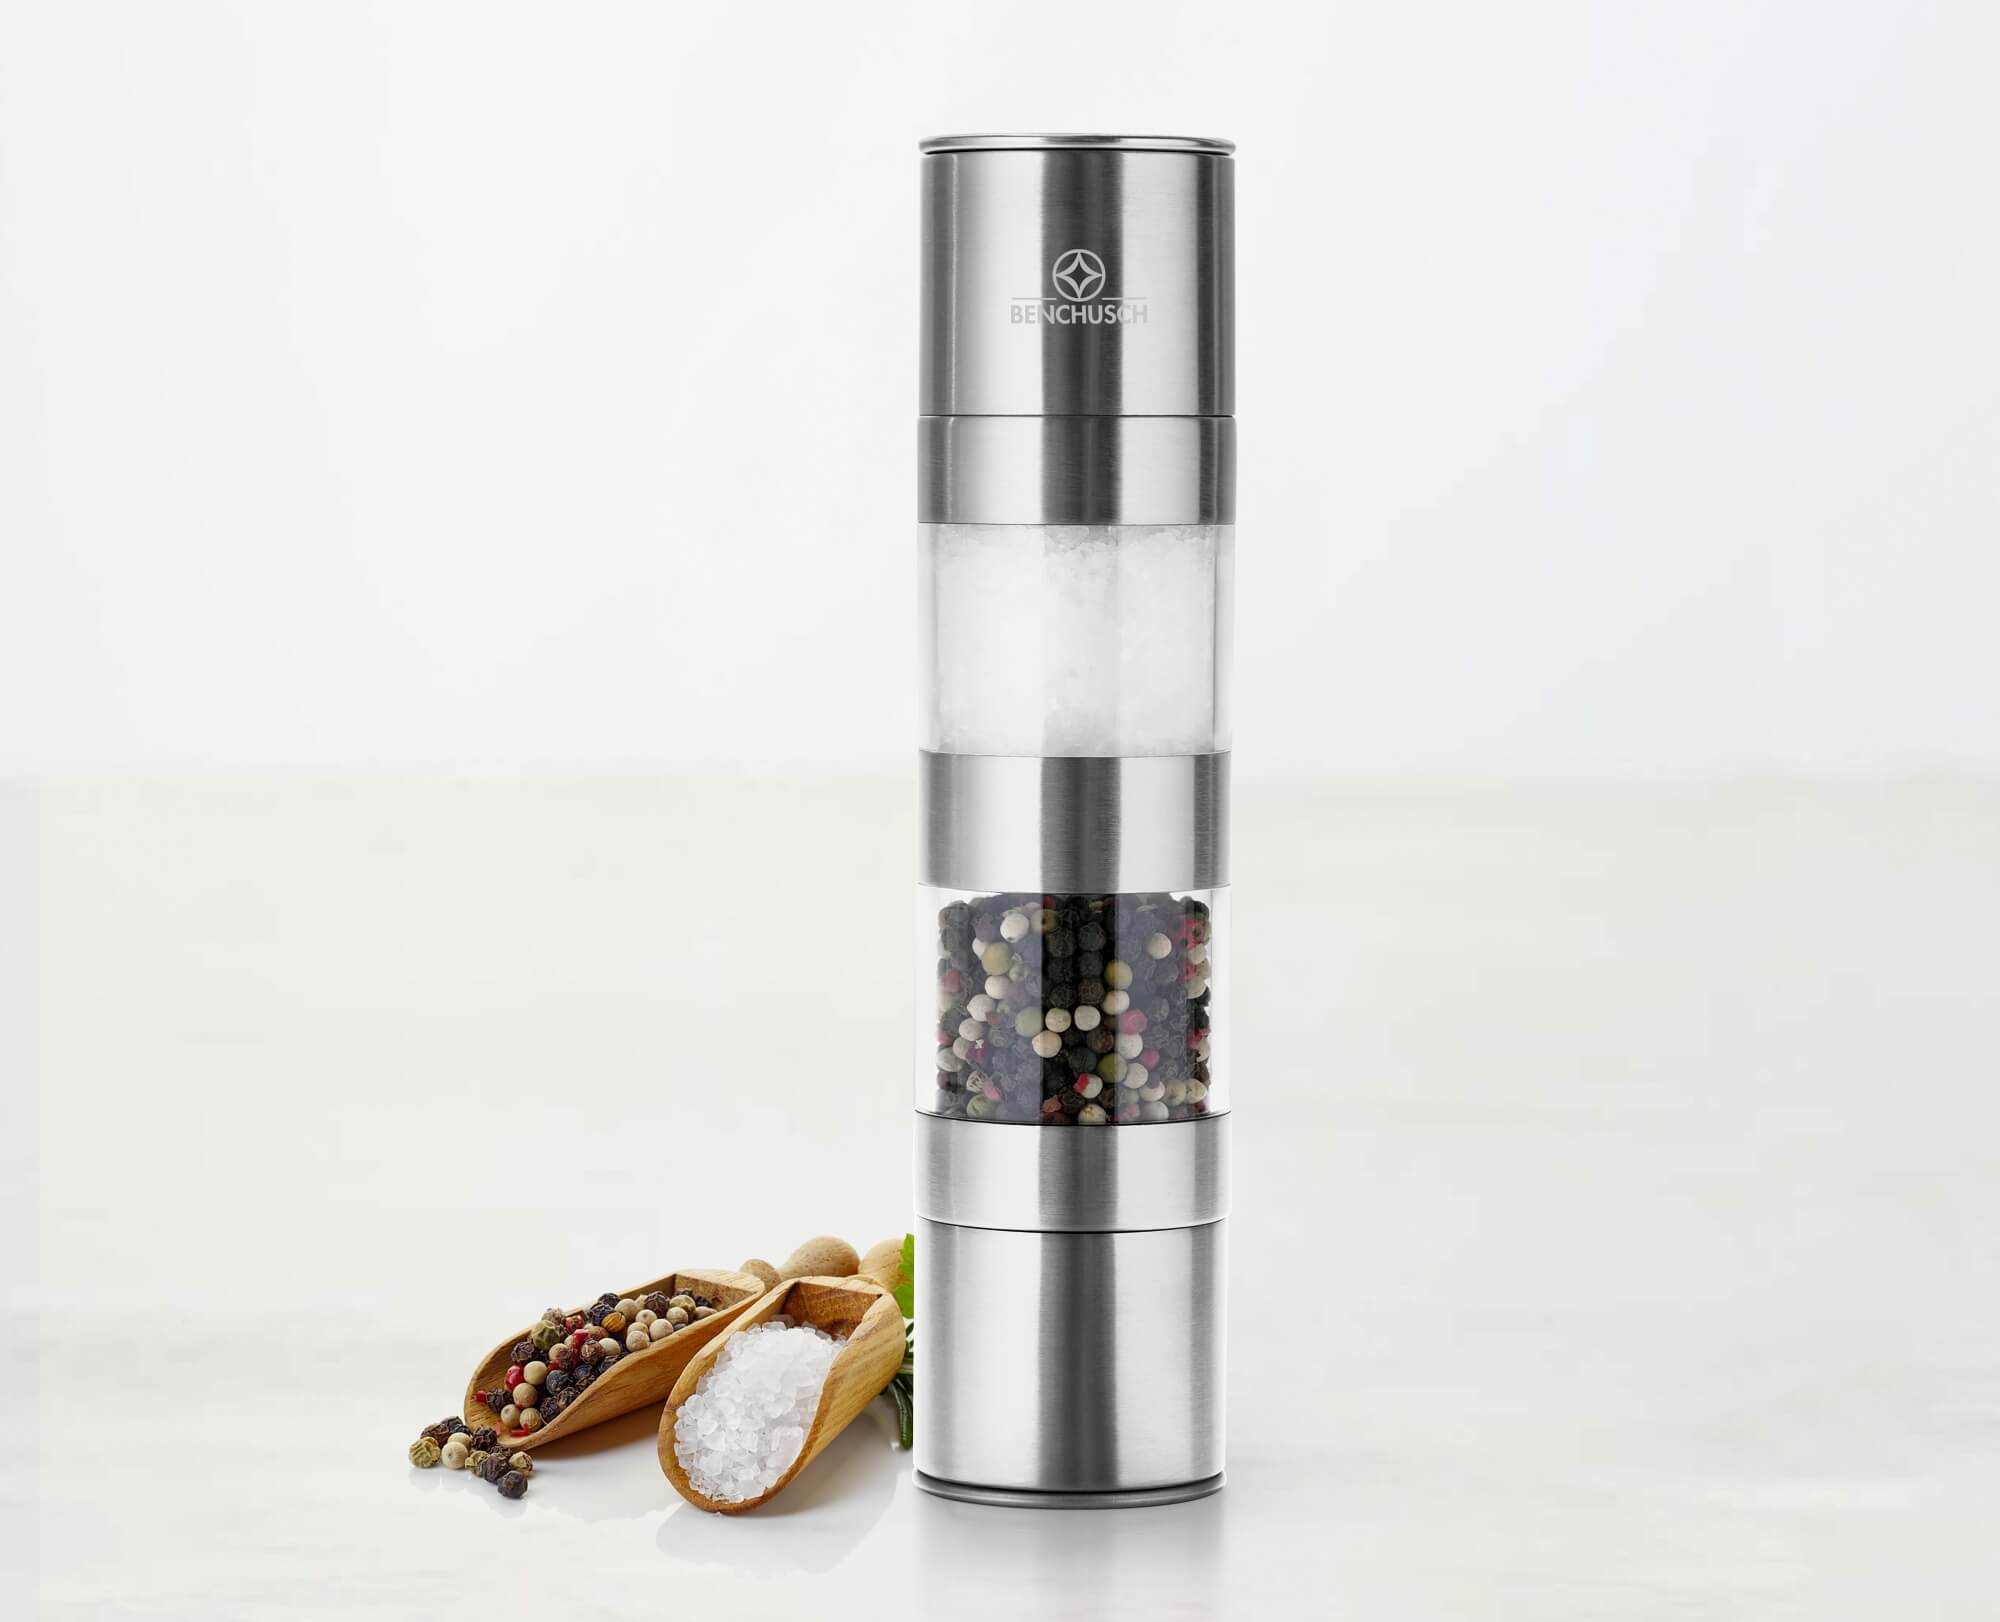 Benchusch Modern 2 in 1 Salt and Pepper Grinder on the marble background